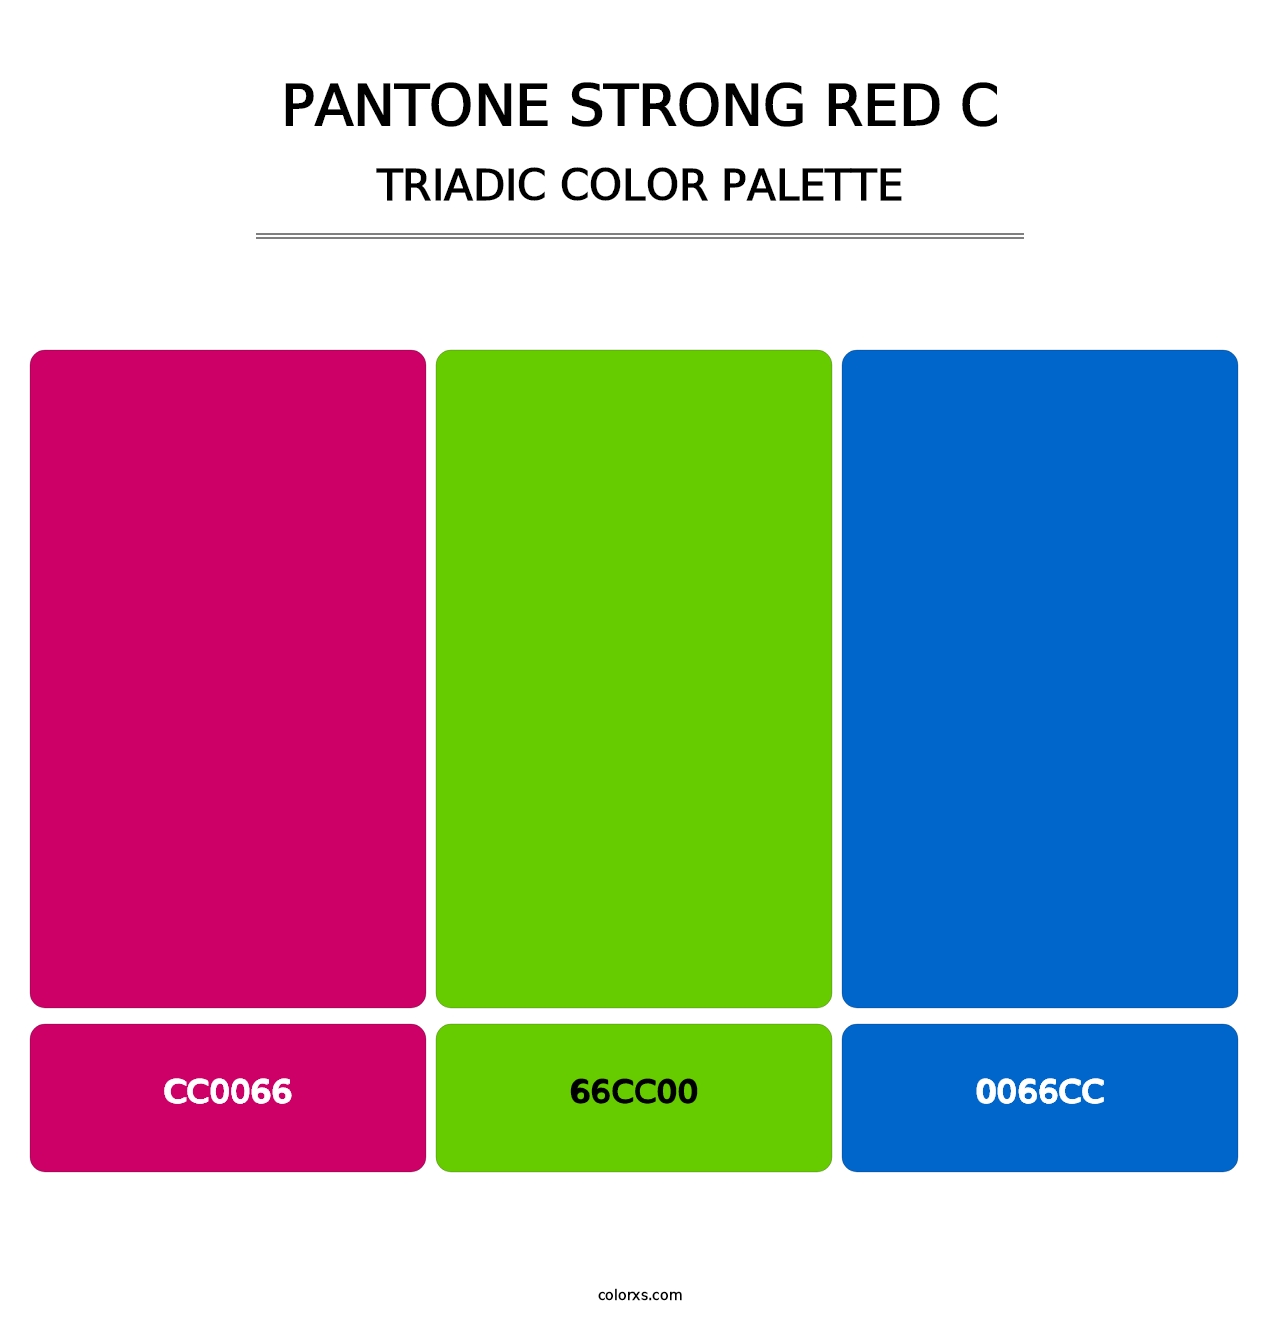 PANTONE Strong Red C - Triadic Color Palette